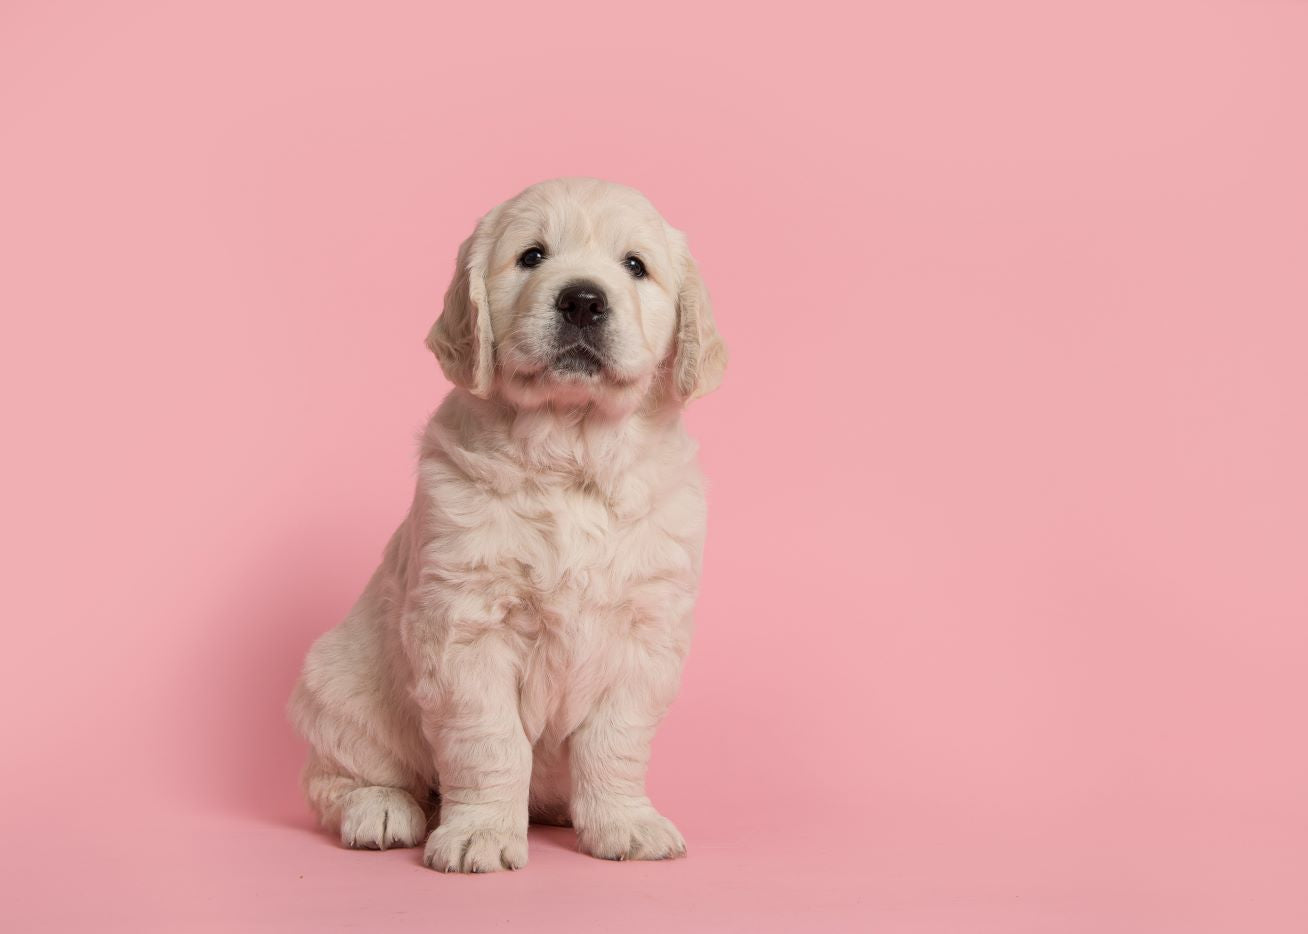 A picture of a puppy with a pink background